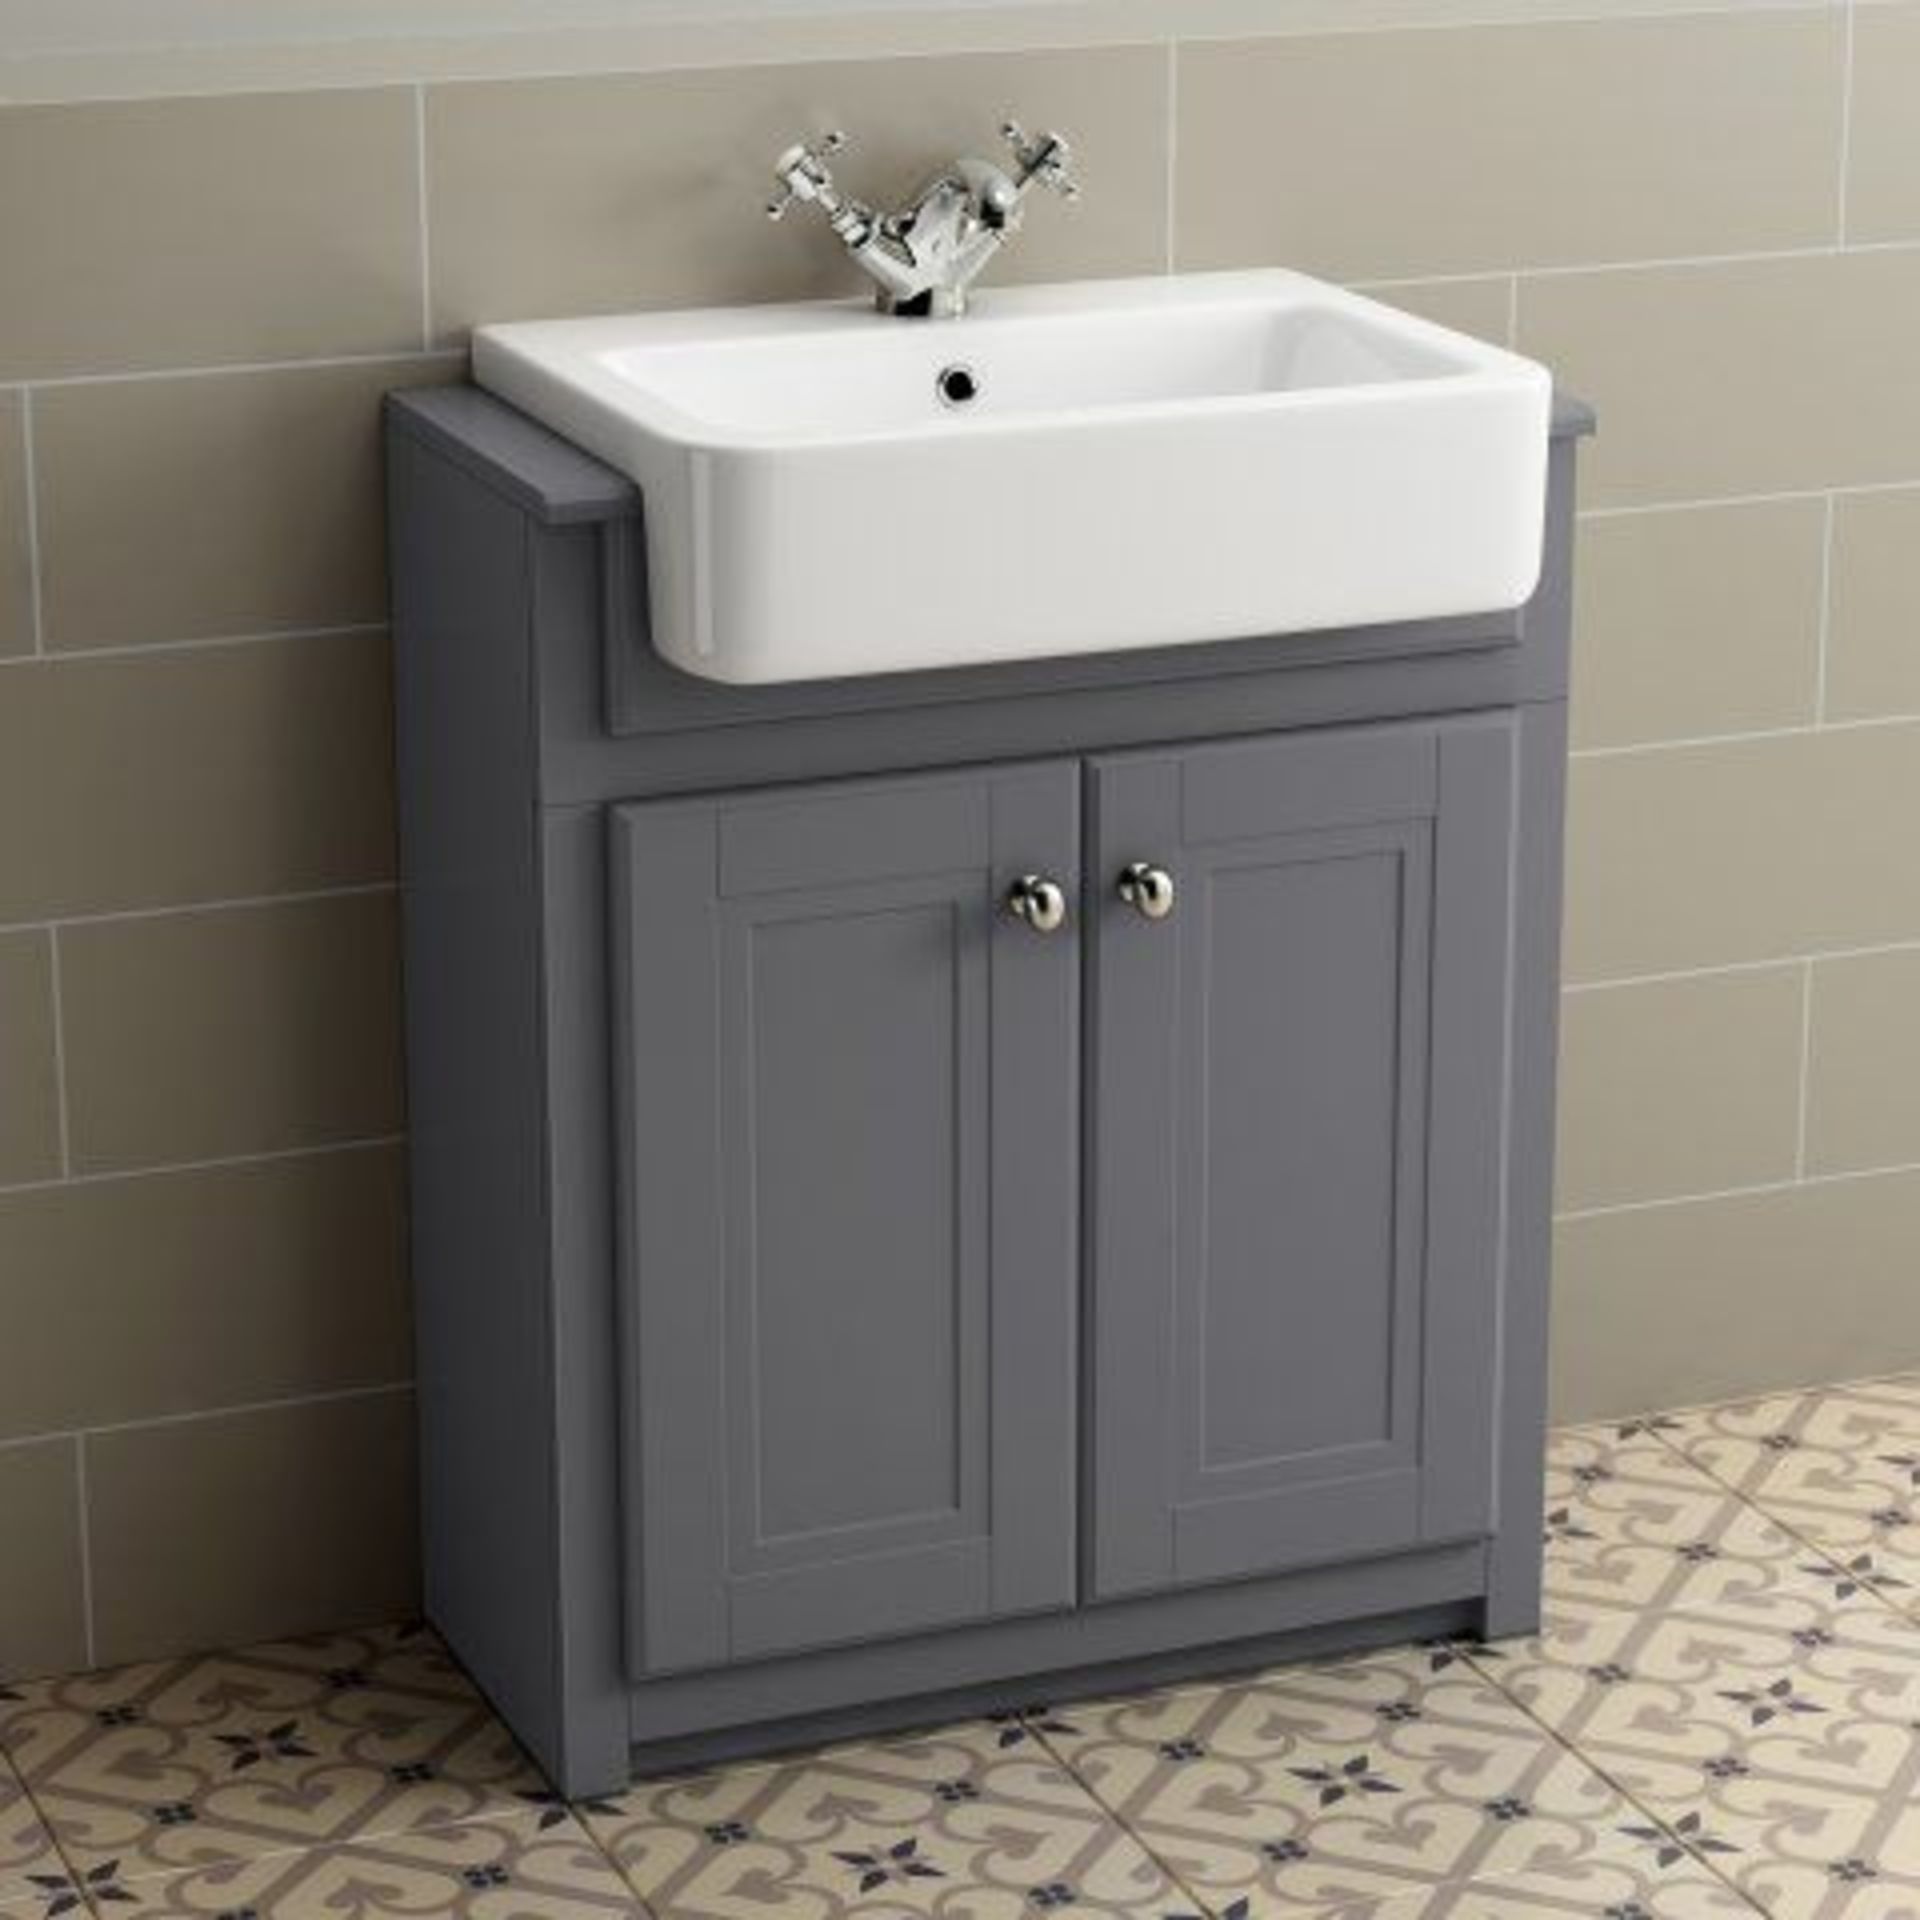 NEW & BOXED 667mm Midnight Grey FloorStanding Sink Vanity Unit. RRP £749.99.Comes complete wi... - Image 4 of 4